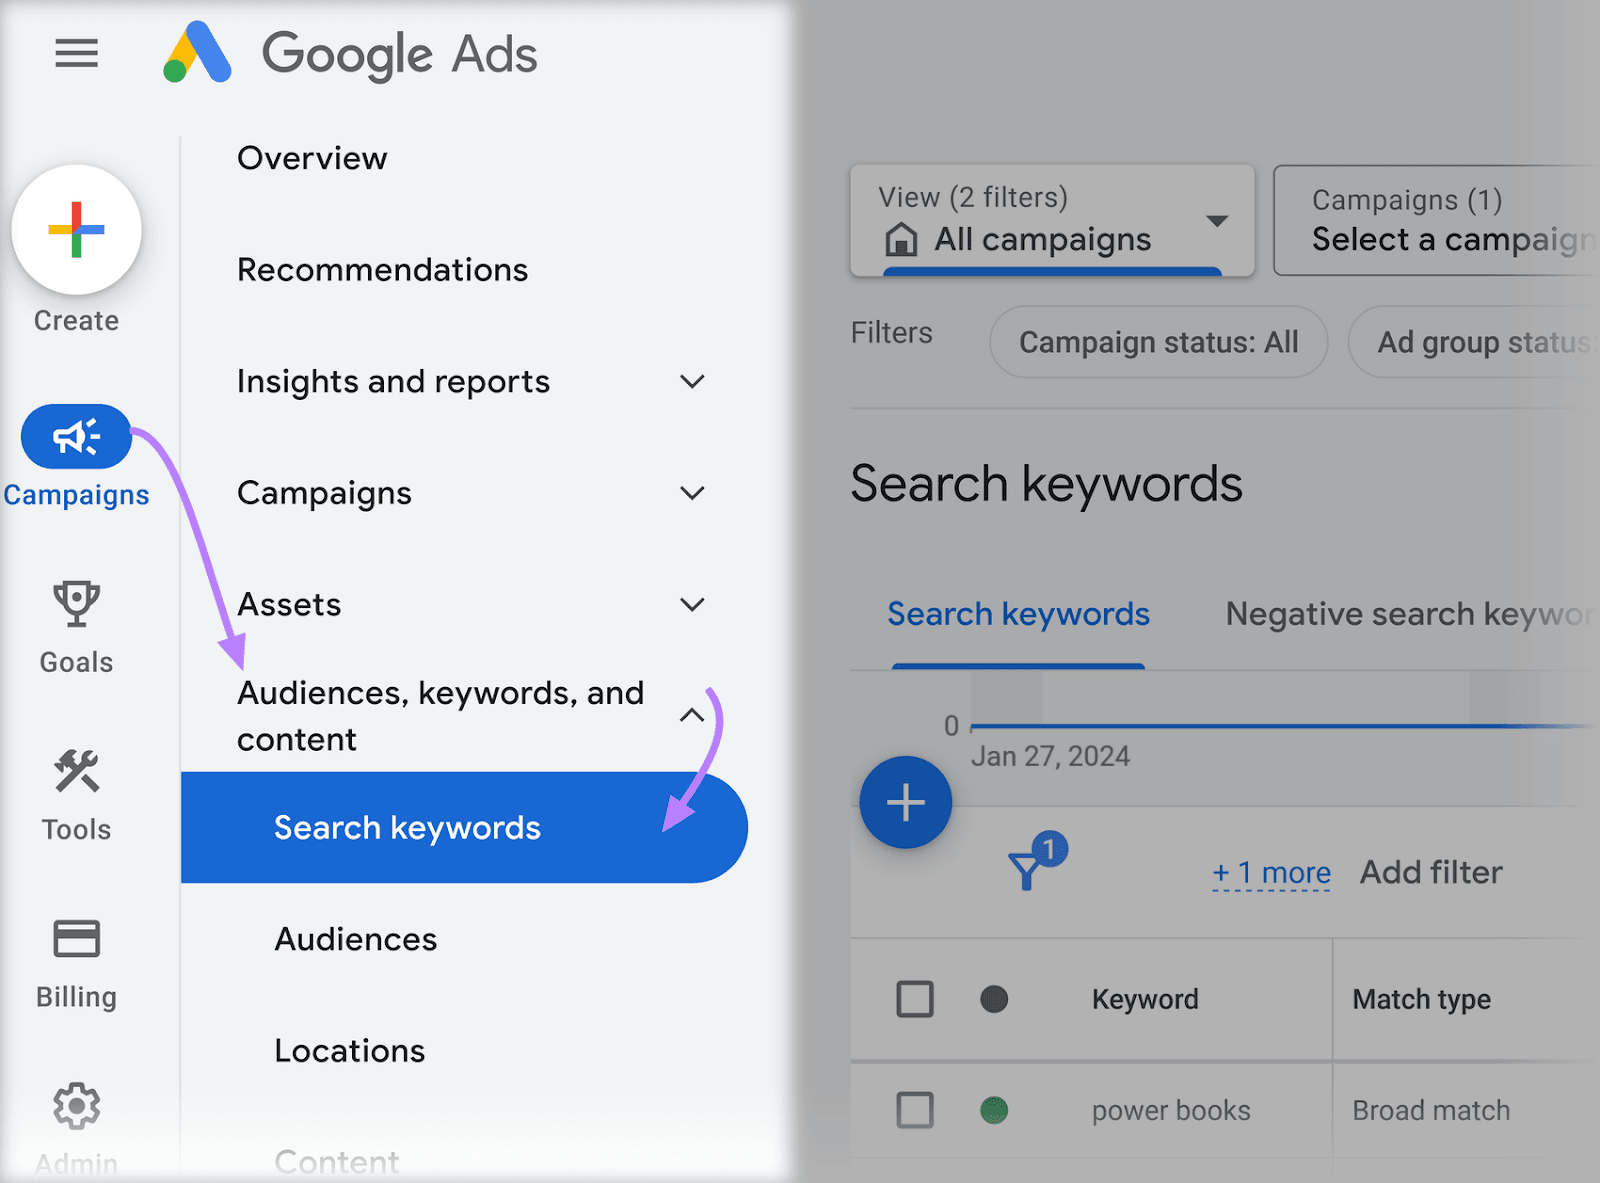 Navigating to "Audiences, keywords, and content" in Google Ads